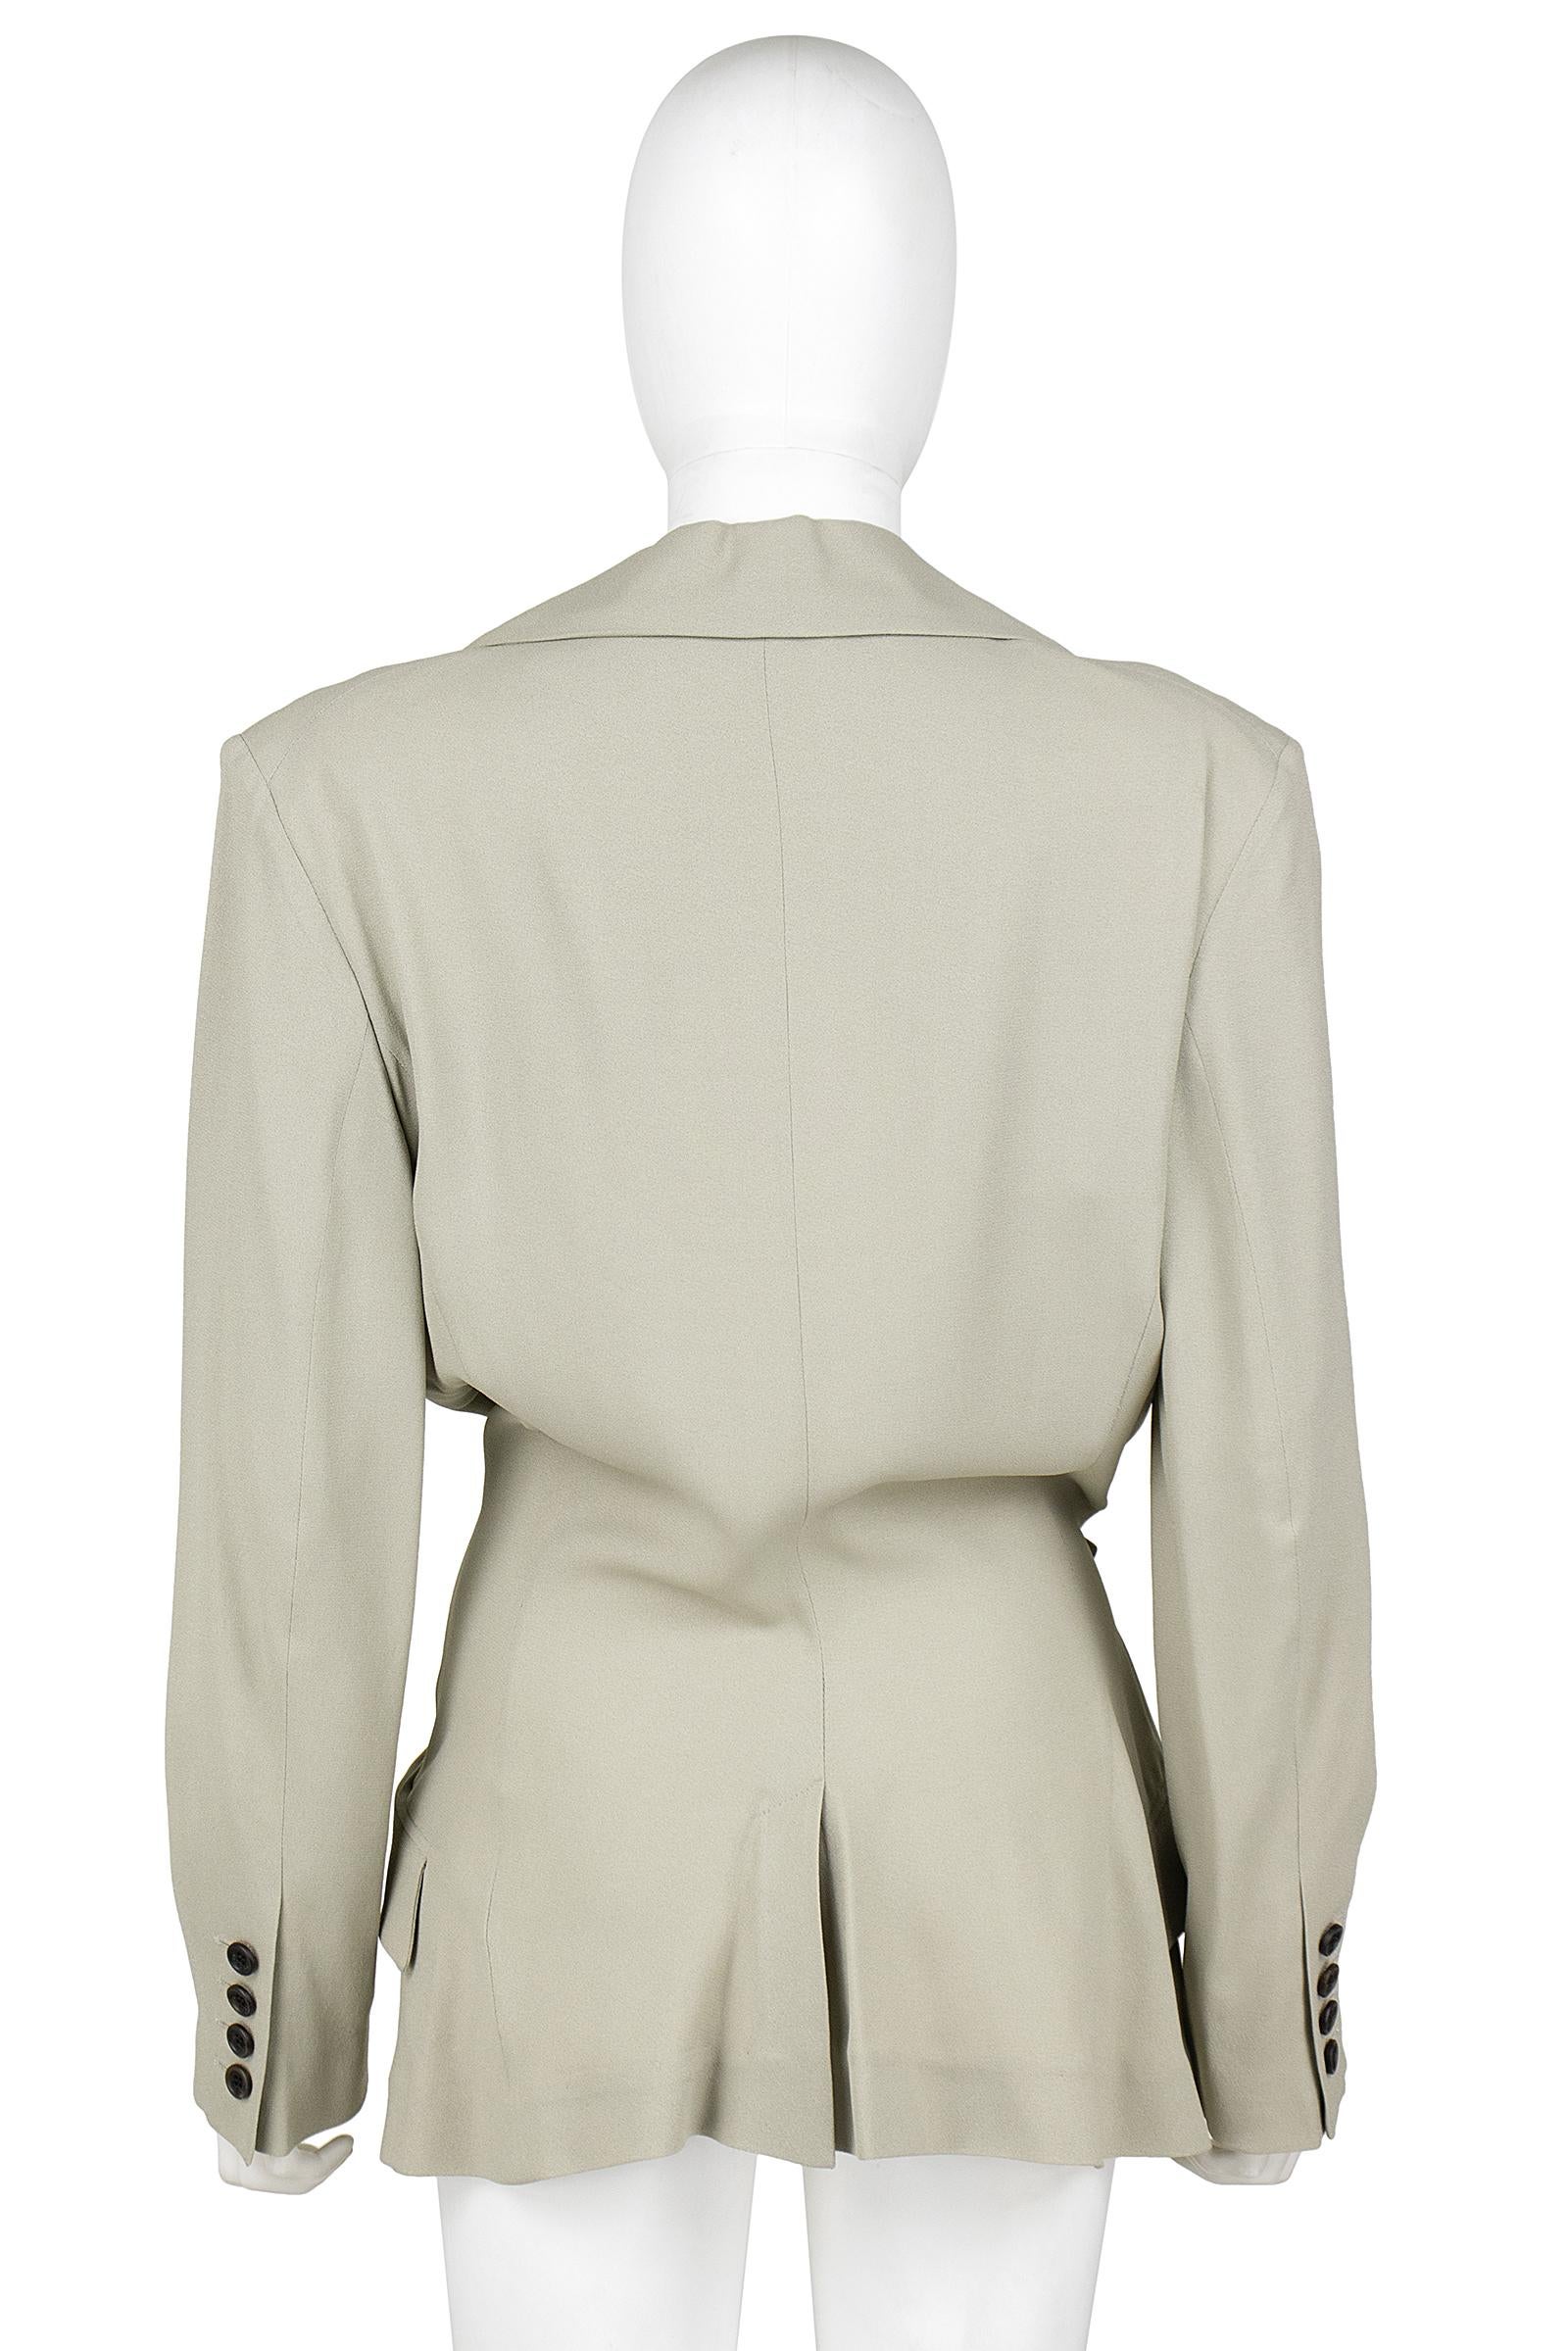 John Galliano Beige Crepe Blazer with Brown Buckle In Good Condition In Los Angeles, CA